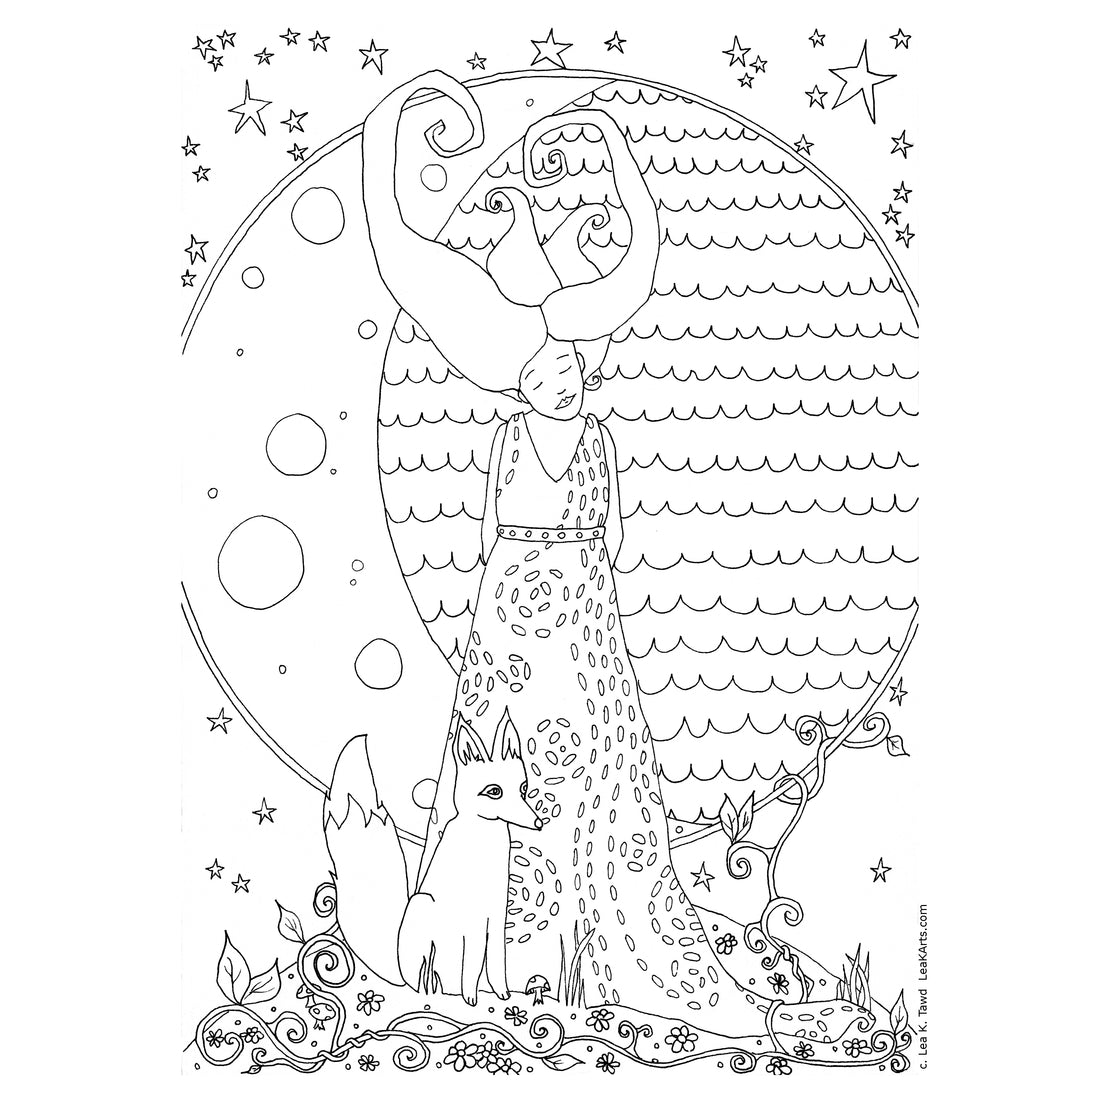 Free Coloring Pages for Adults and Kids!